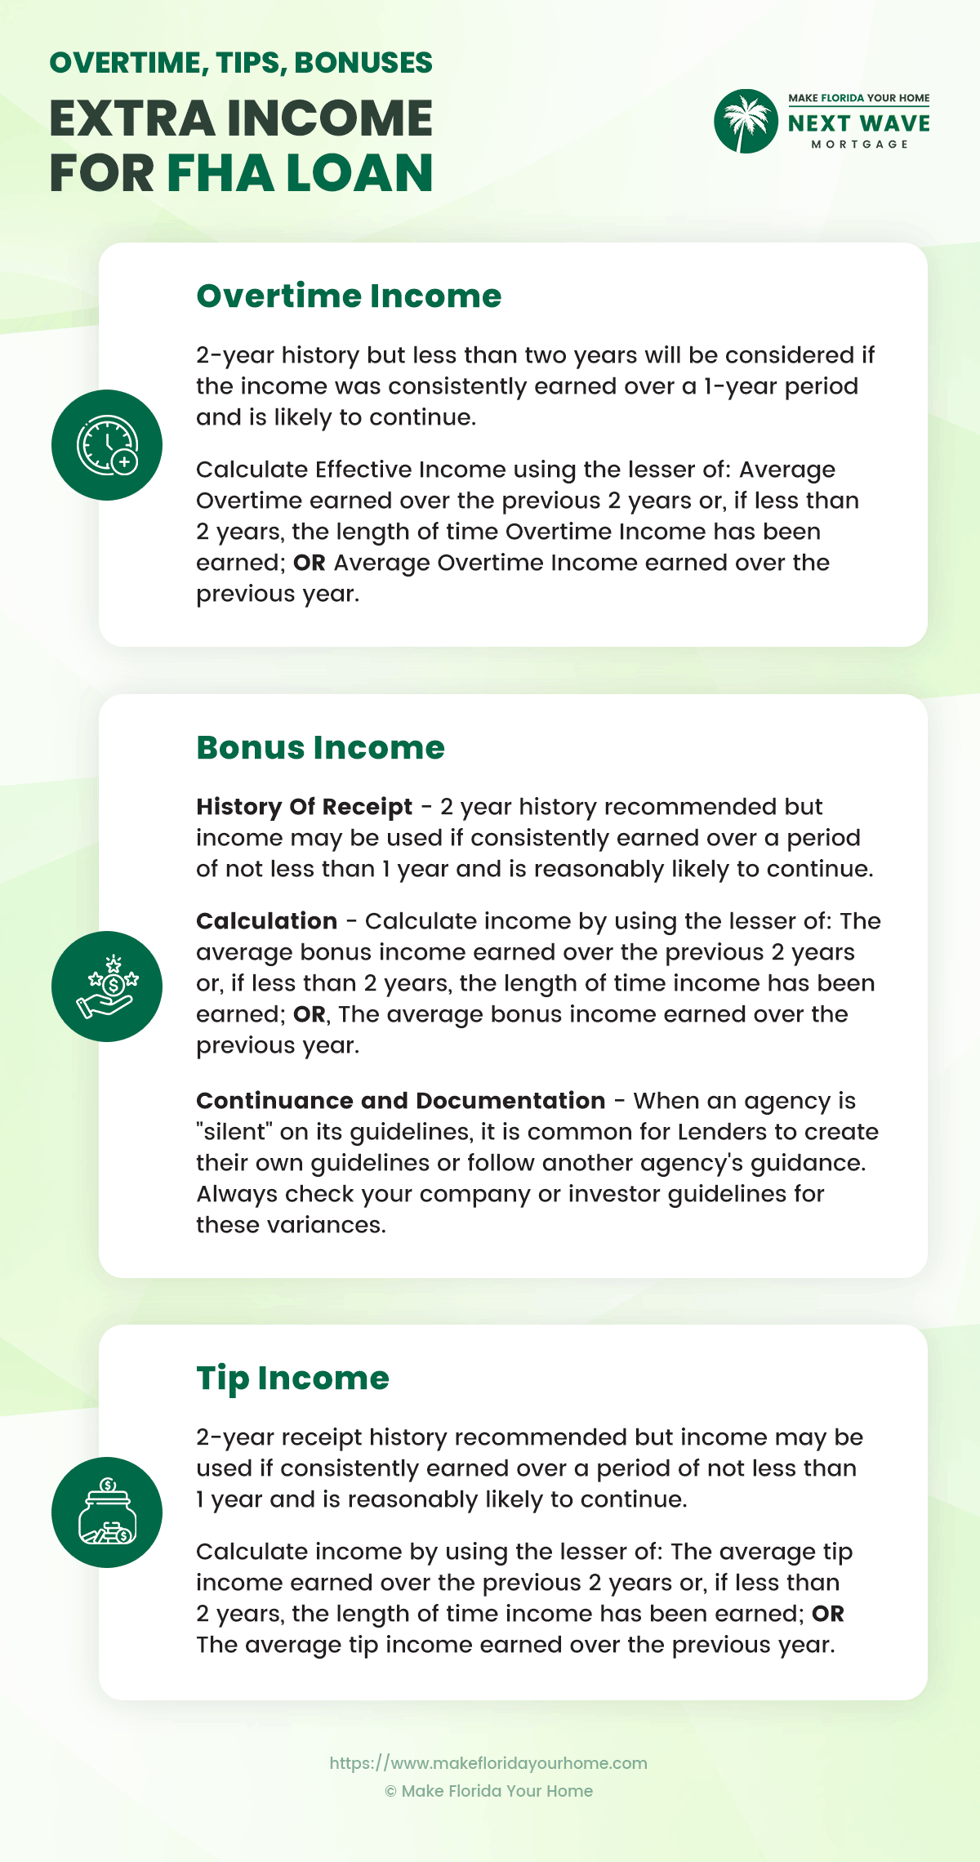 Extra Income for FHA Loan - Overtime Tips Bonuses - Infographic